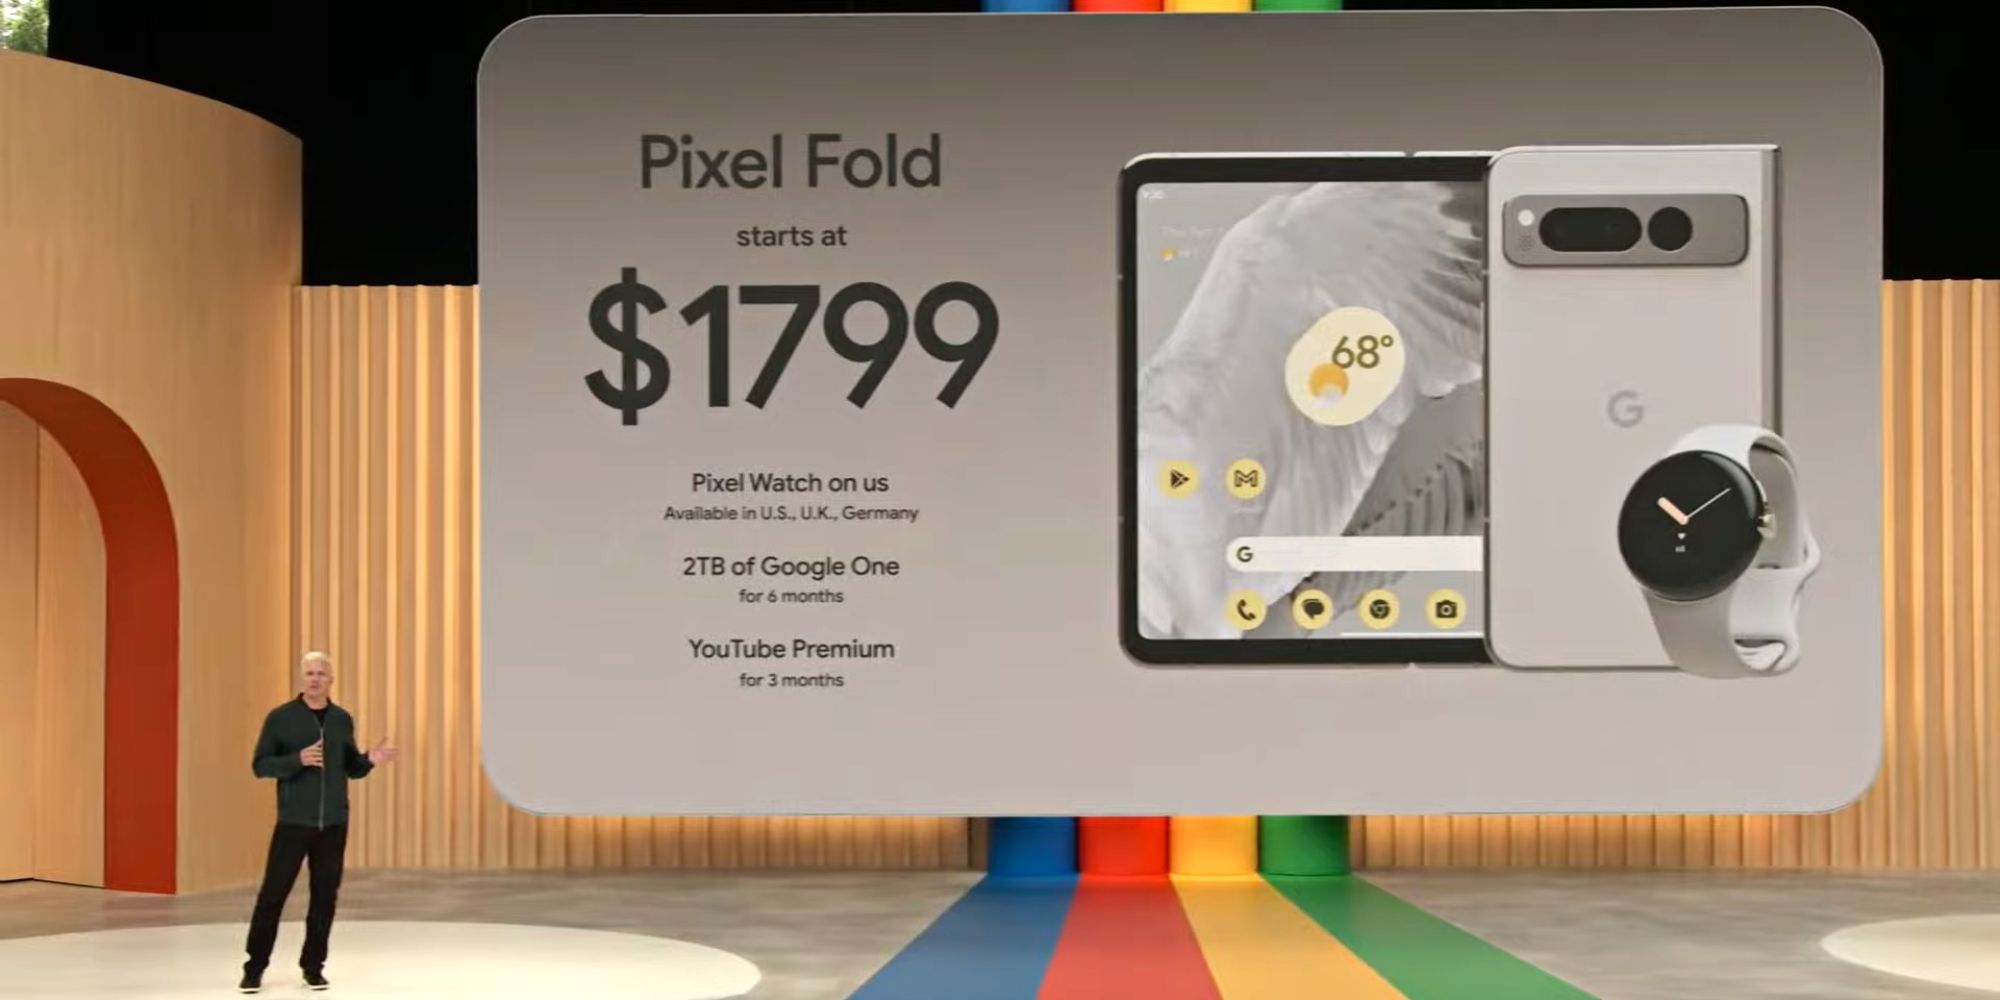 Pixel Fold revealed at the Google IO with price